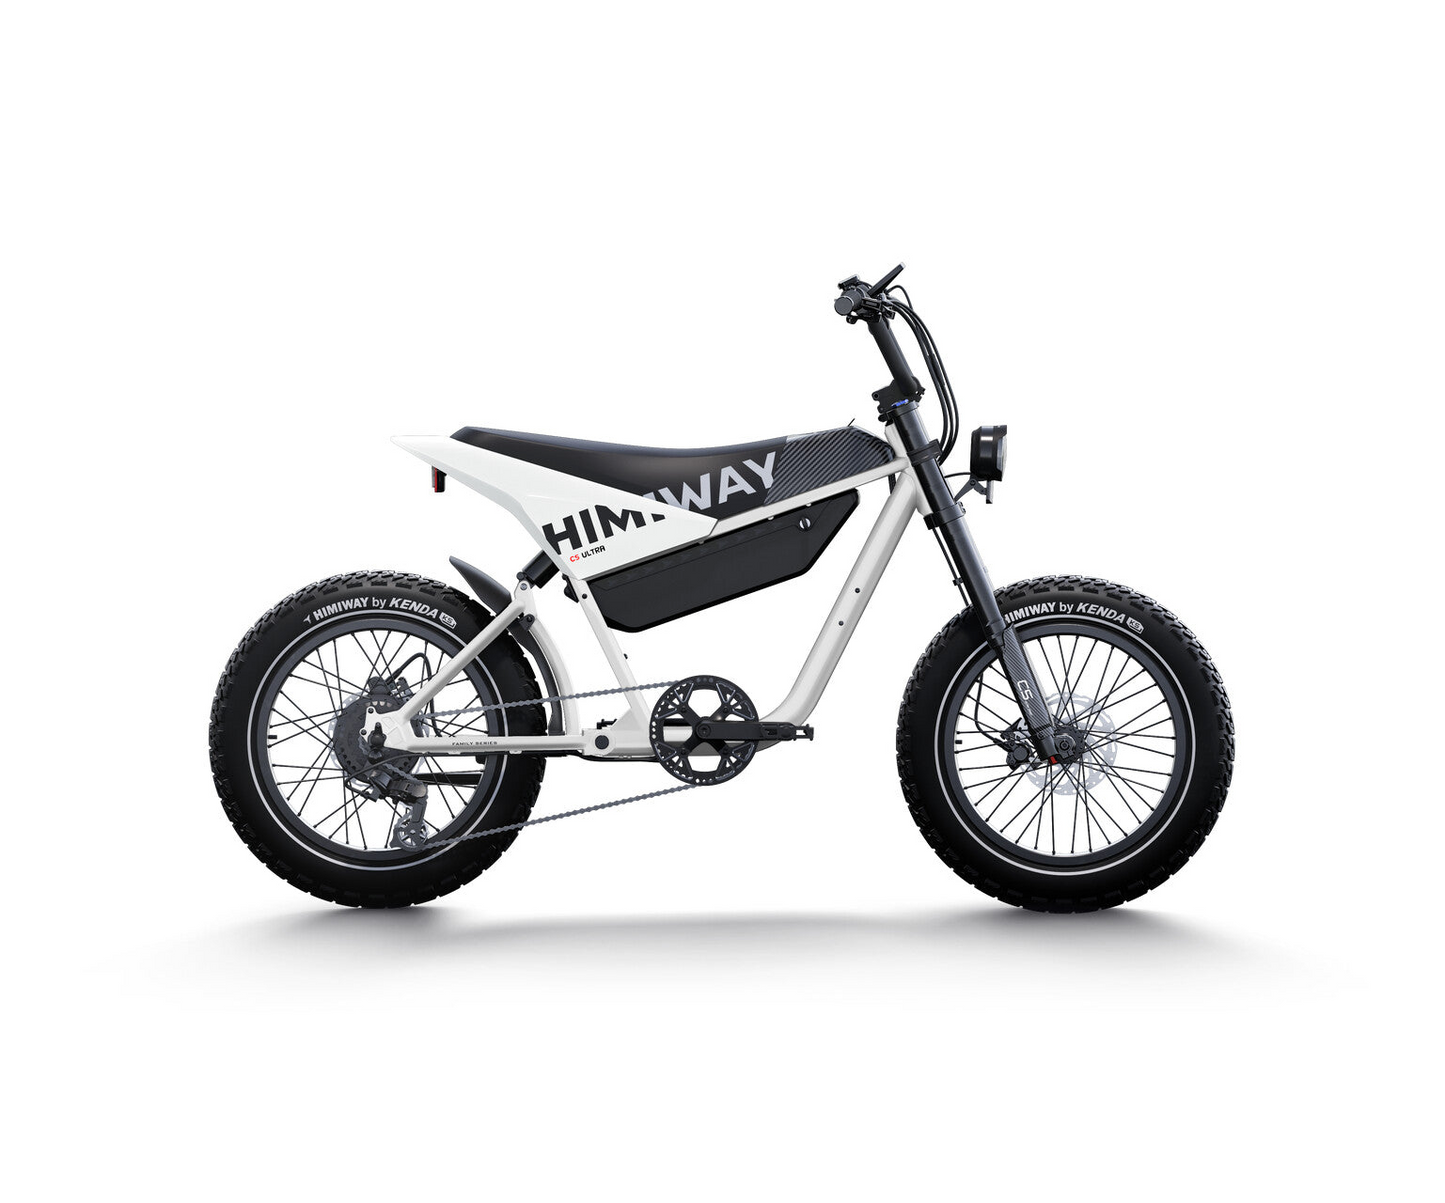 Side view of a white and black electric bike with thick tires, a battery compartment, and "Himiway" branding on the frame, featuring an advanced torque sensor for precise control. The Himiway - C5 electric motorcycle boasts an extended range for longer rides.